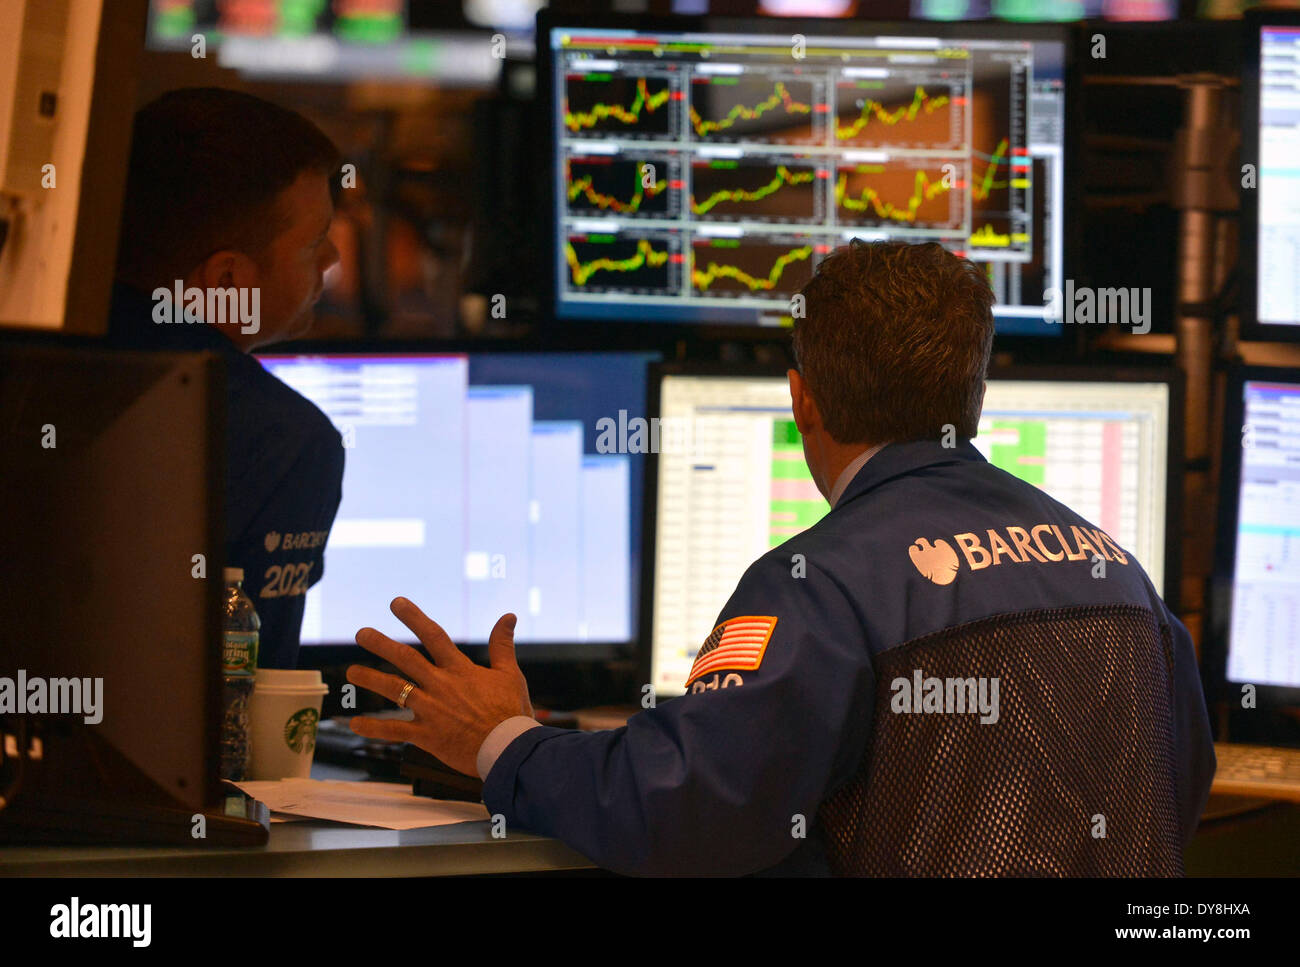 New York, USA. 9th Apr, 2014. Traders work at the New York Stock Exchange in New York, April 9, 2014. U.S. stocks continued to rebound Wednesday, with major stock indices jumping over 1 percent, as market concerns over interest rate hike were eased somewhat by the minutes of the Federal Reserve's latest policy meeting. The Dow Jones Industrial Average surged 181.04 points, or 1.11 percent, to 16,437.18. The S&P 500 soared 20.22 points, or 1.09 percent, to 1,872.18. The Nasdaq Composite Index climbed 70.91 points, or 1.72 percent, to 4,183.90. © Wang Lei/Xinhua/Alamy Live News Stock Photo